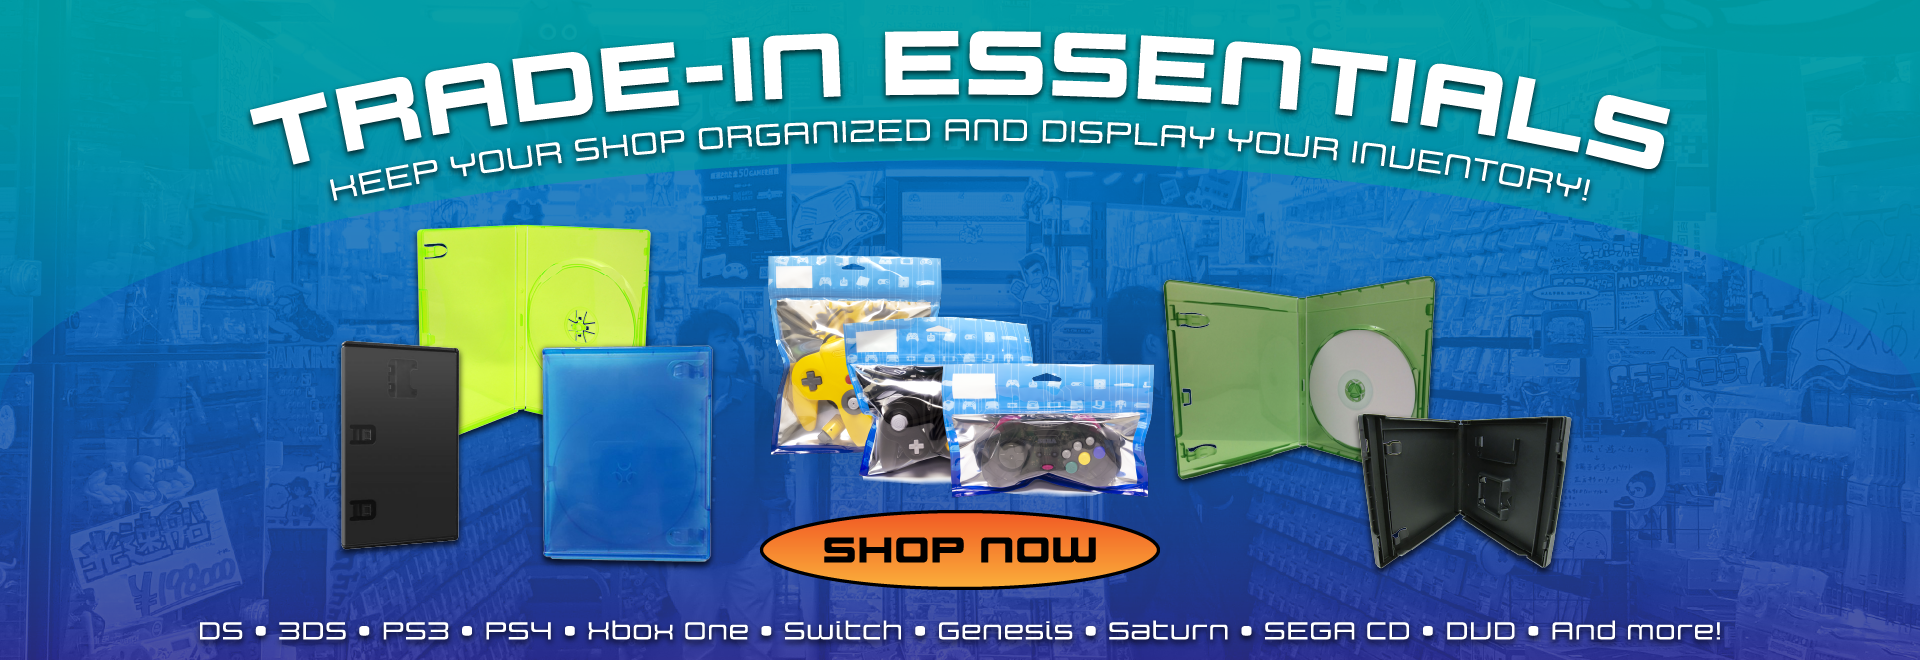 Trade-In essentials for your shop!